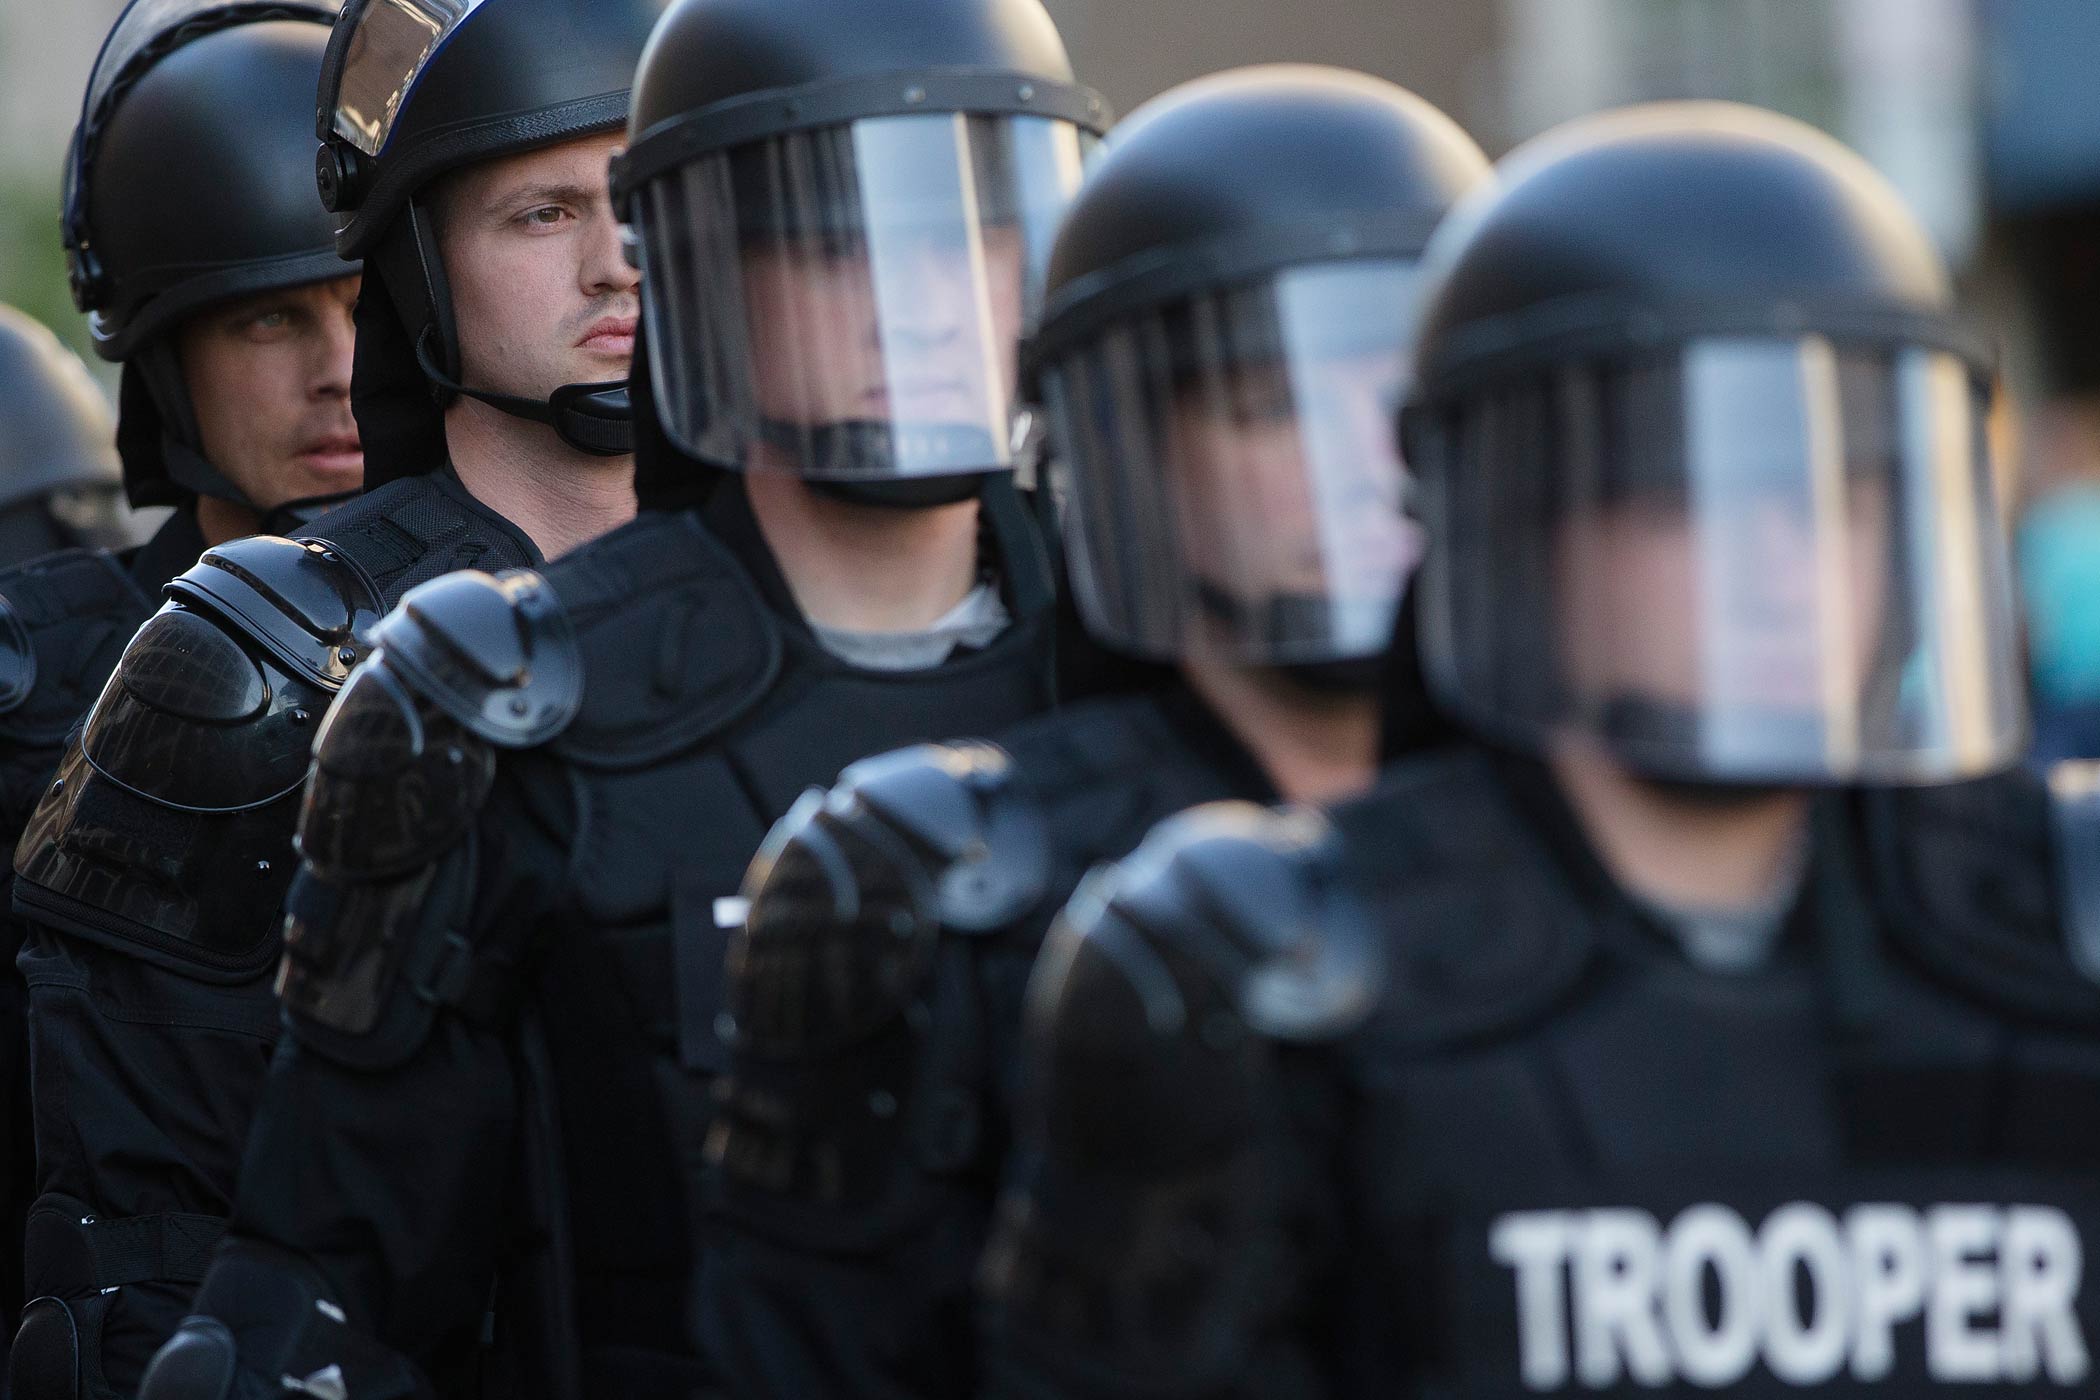 Riot police stand in formation as a protest forms against the acquittal of Michael Brelo, a patrolman charged in the shooting deaths of two unarmed suspects, on May 23, 2015, in Cleveland. (John Minchillo—AP)